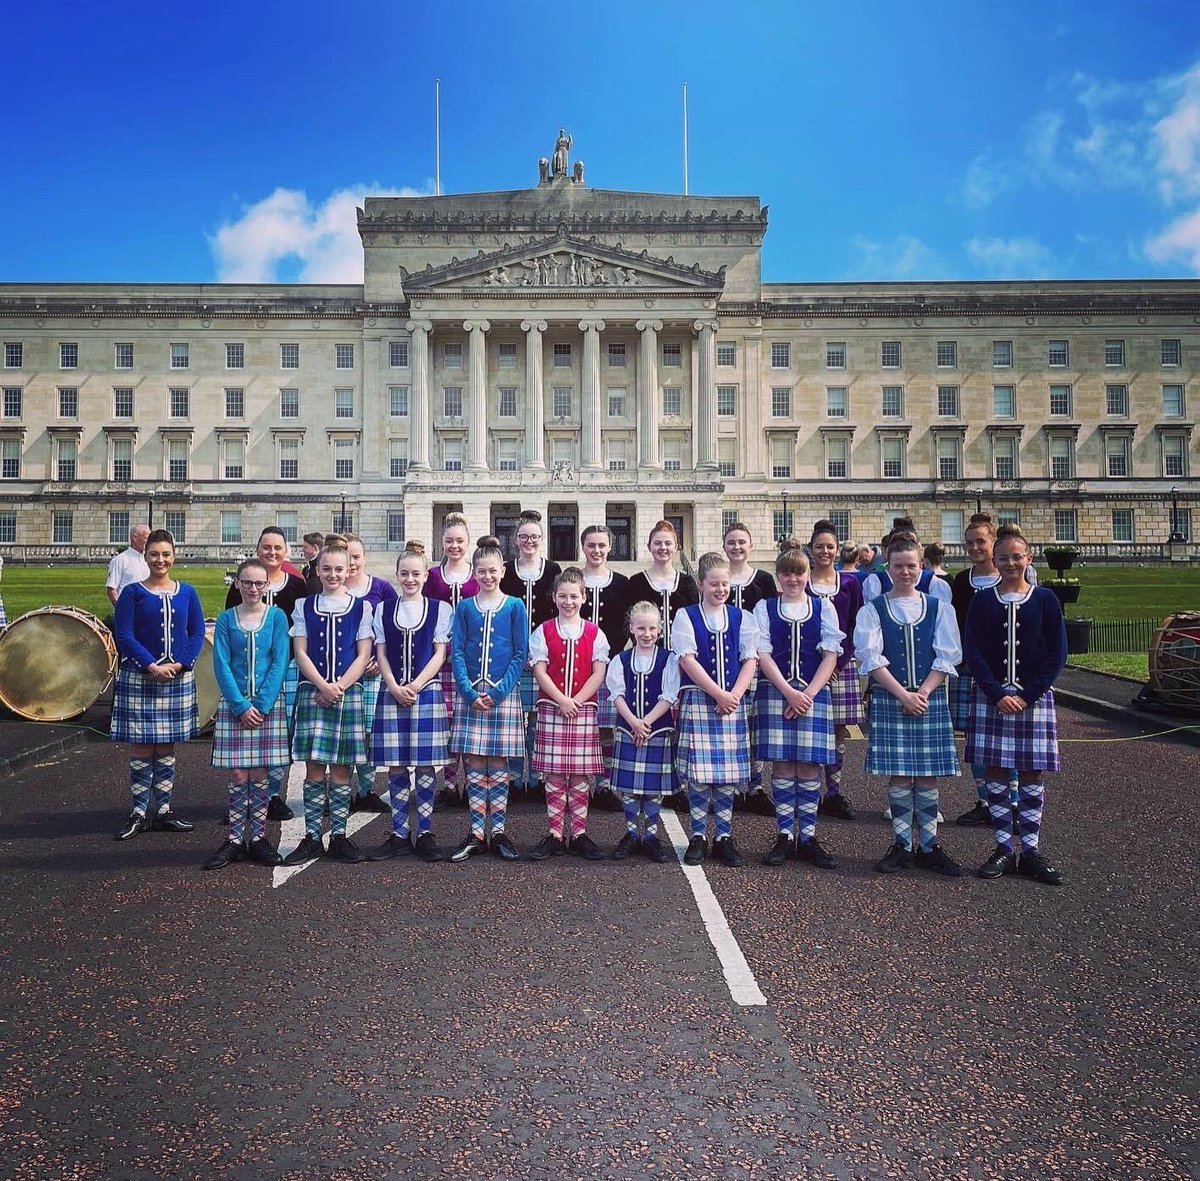 Well done to our #Kirknarra Dancers for joining with many other dancers from the Kathryn Stewart Dance Team and also hundreds of others from #UlsterScots groups to create this special Queen’s Platinum Jubilee tribute at Stormont this morning!

#PlatinumJubileeCelebration